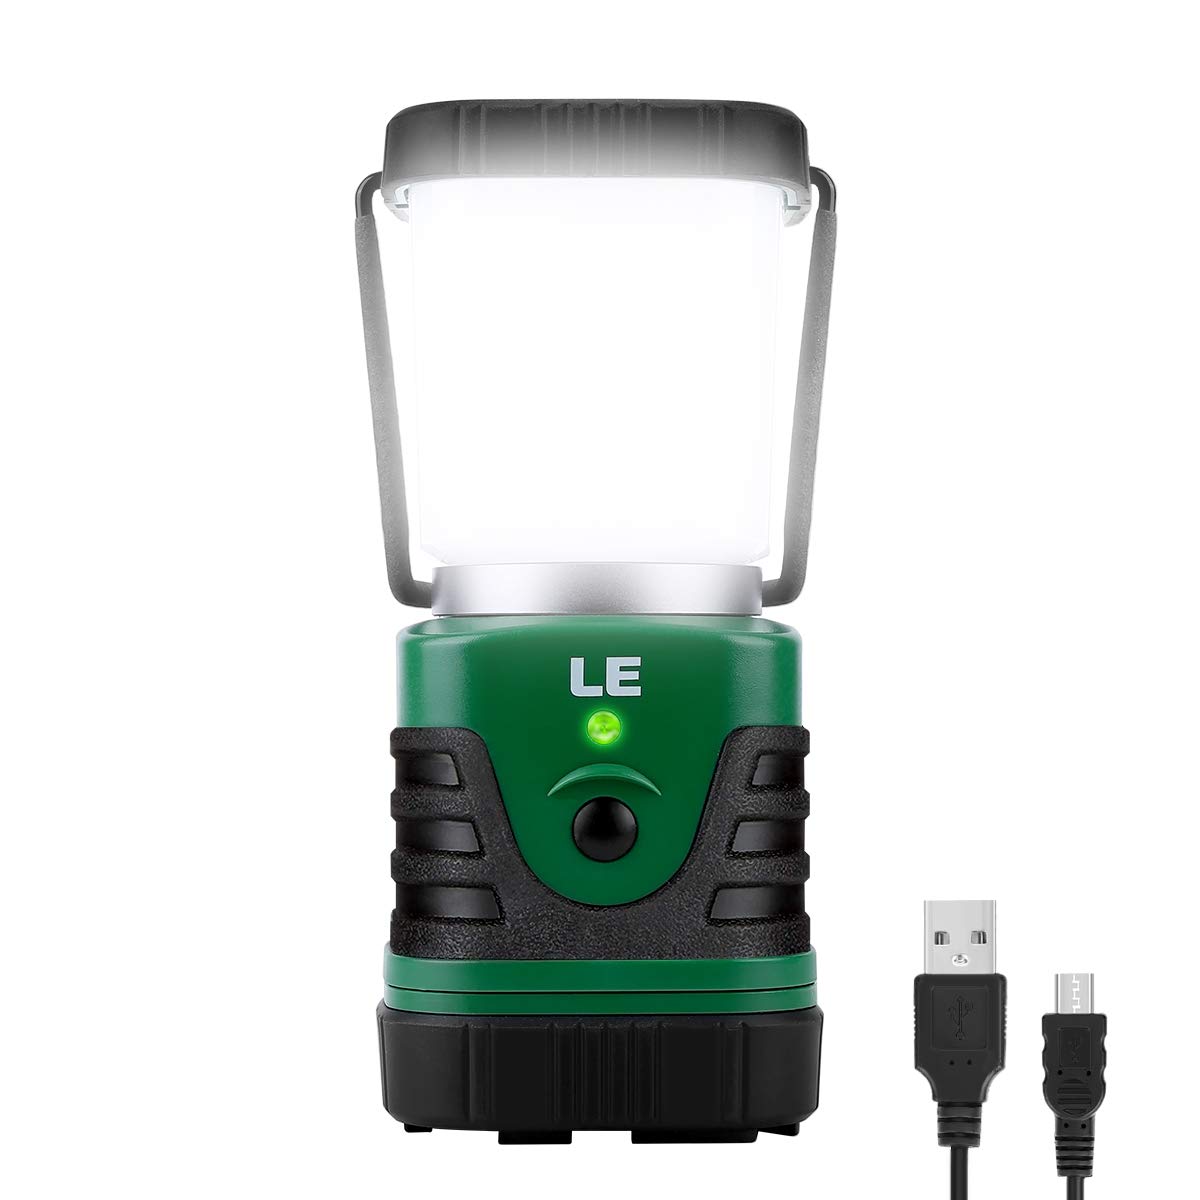  Lighting Ever LED Camping Lantern Rechargeable, Flashlight with  500LM, 5 Light Modes, 2600mAh Power Bank, IPX4 Waterproof, for Hurricane  Emergency, Outdoor, Hiking and Home, USB Cable Included : Sports & Outdoors